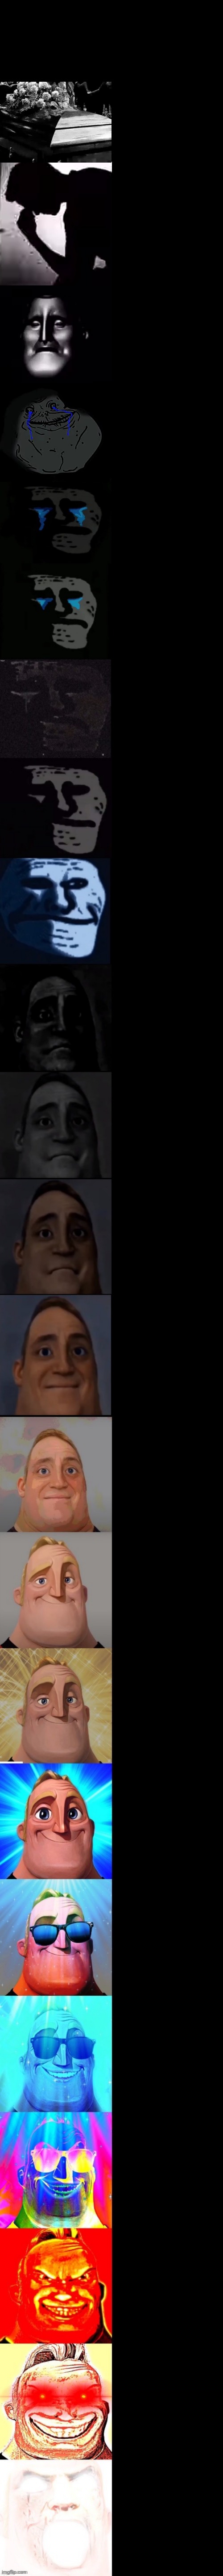 Mr. Incredible becoming sad to canny extended Blank Meme Template